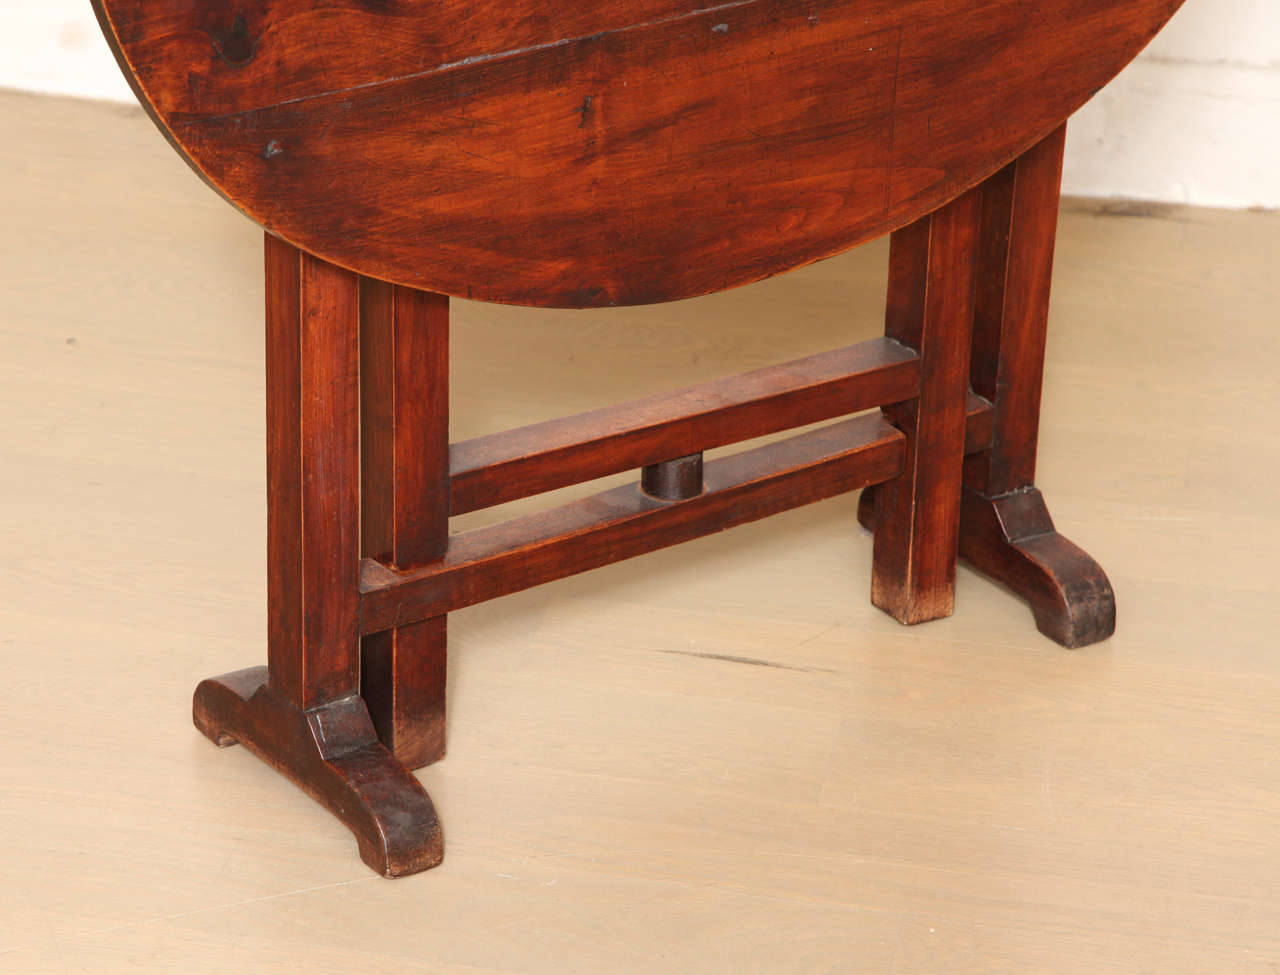 Wood French Oval Cherry Folding Tilt Top Side Table, Late 19th or 20th Century For Sale